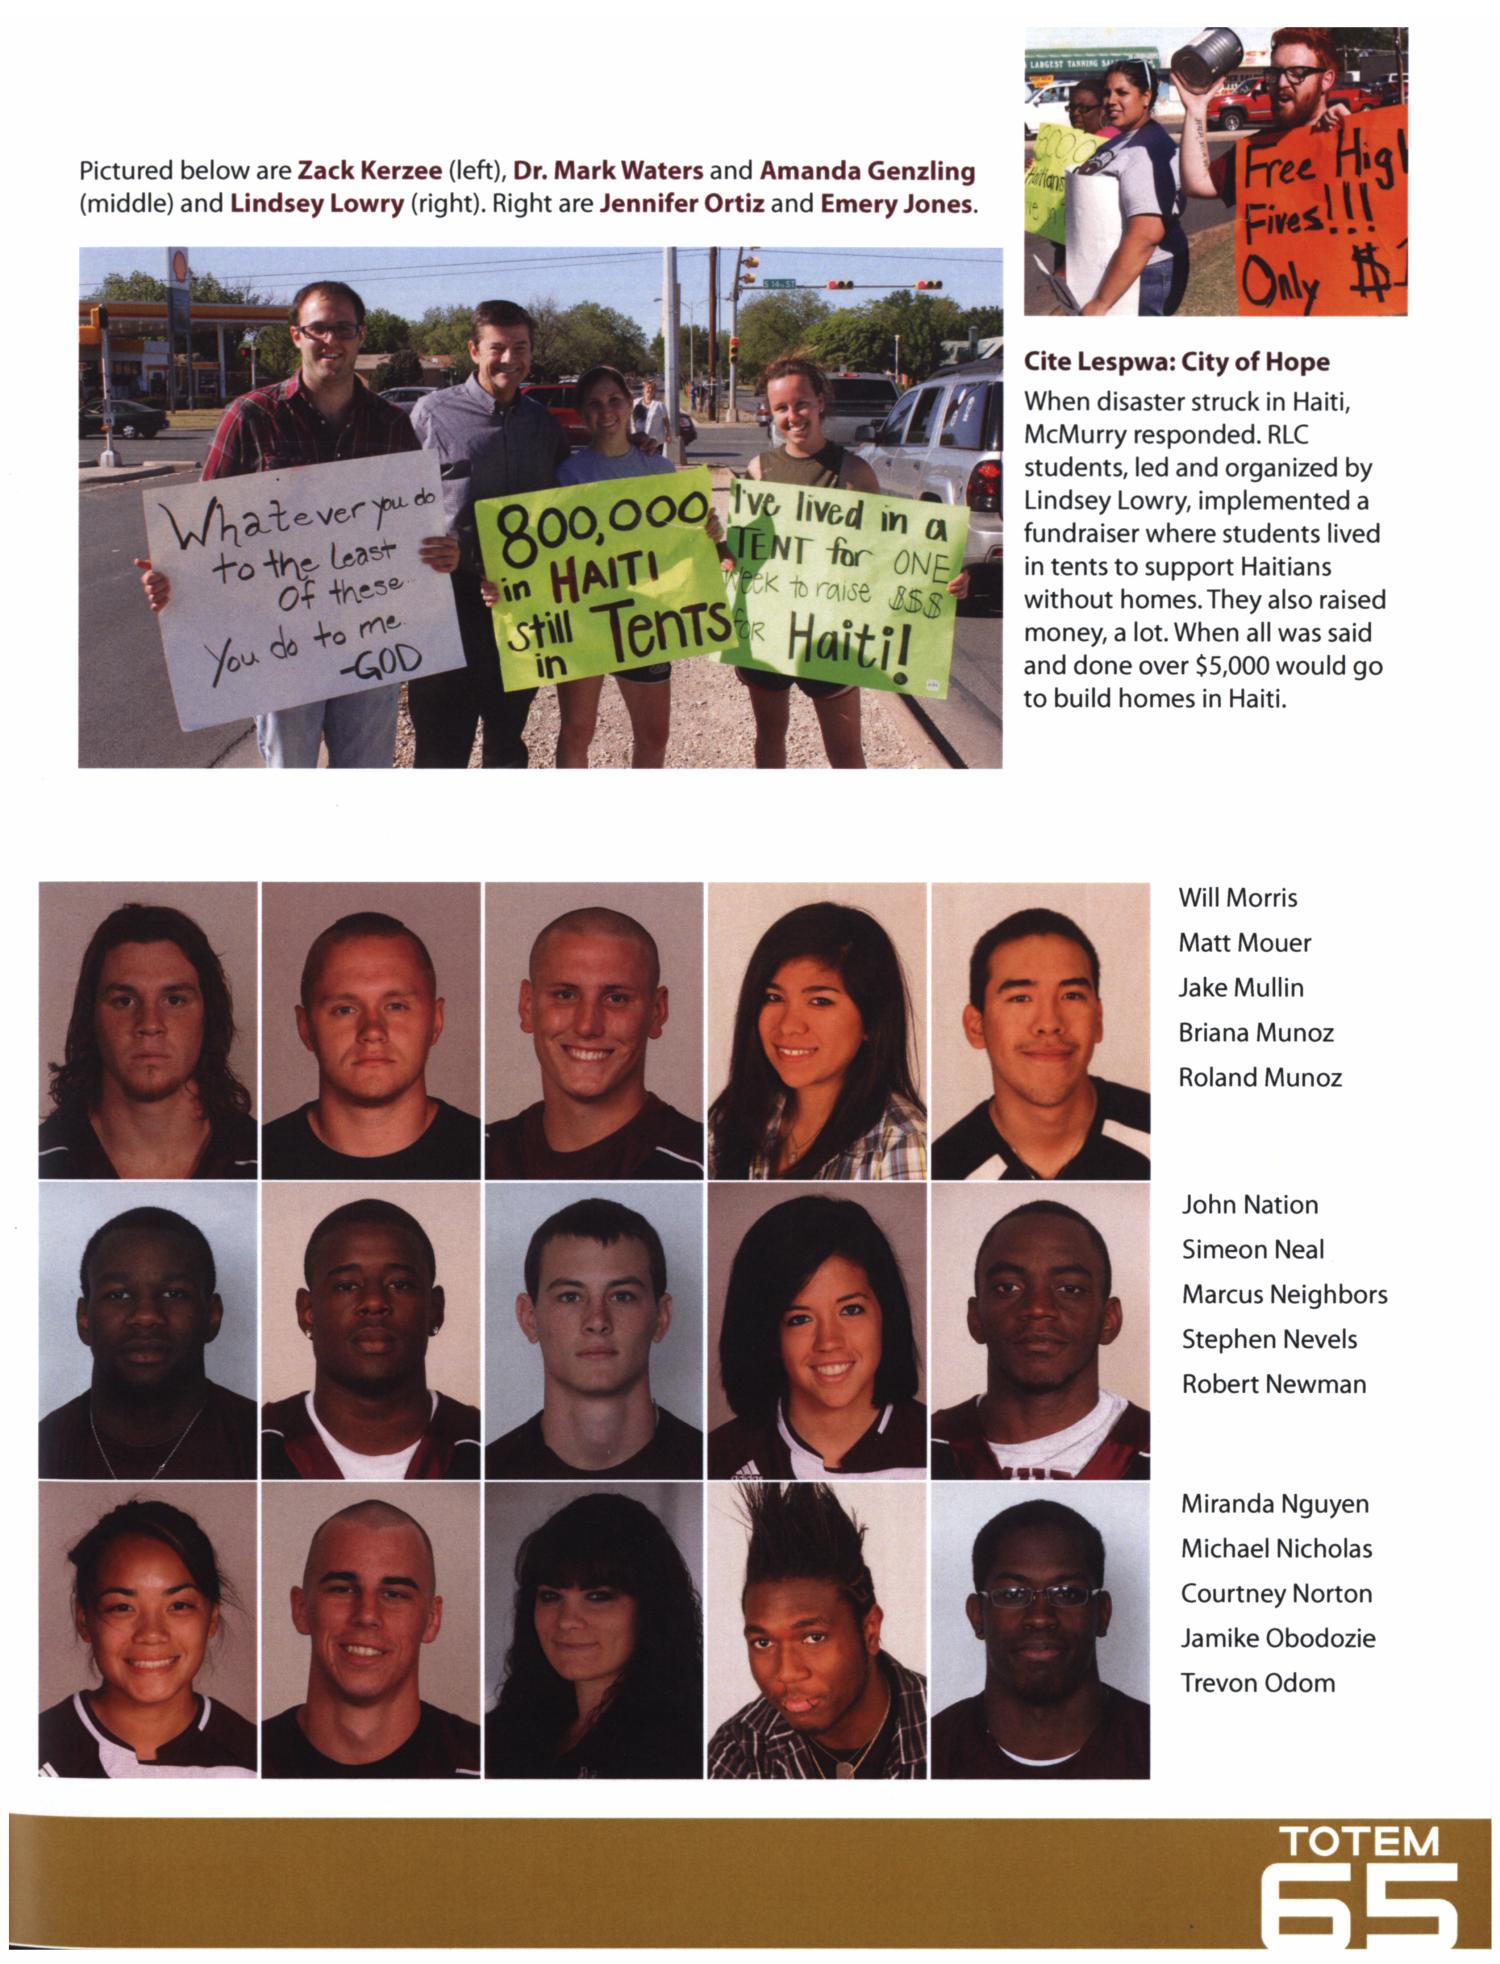 The Totem, Yearbook of McMurry University, 2011
                                                
                                                    65
                                                